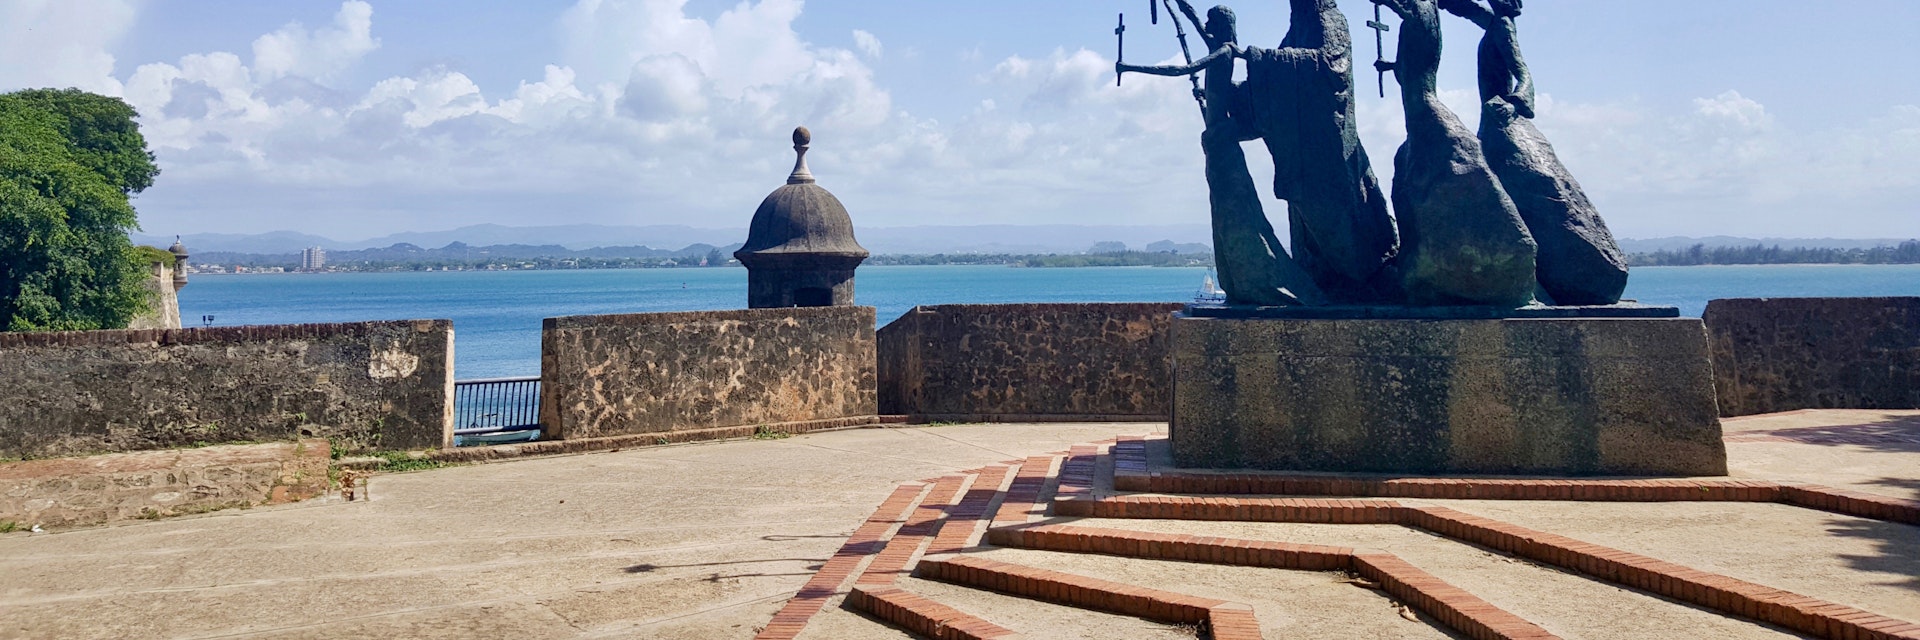 Side view of bronze statue by the water in Old San Juan.